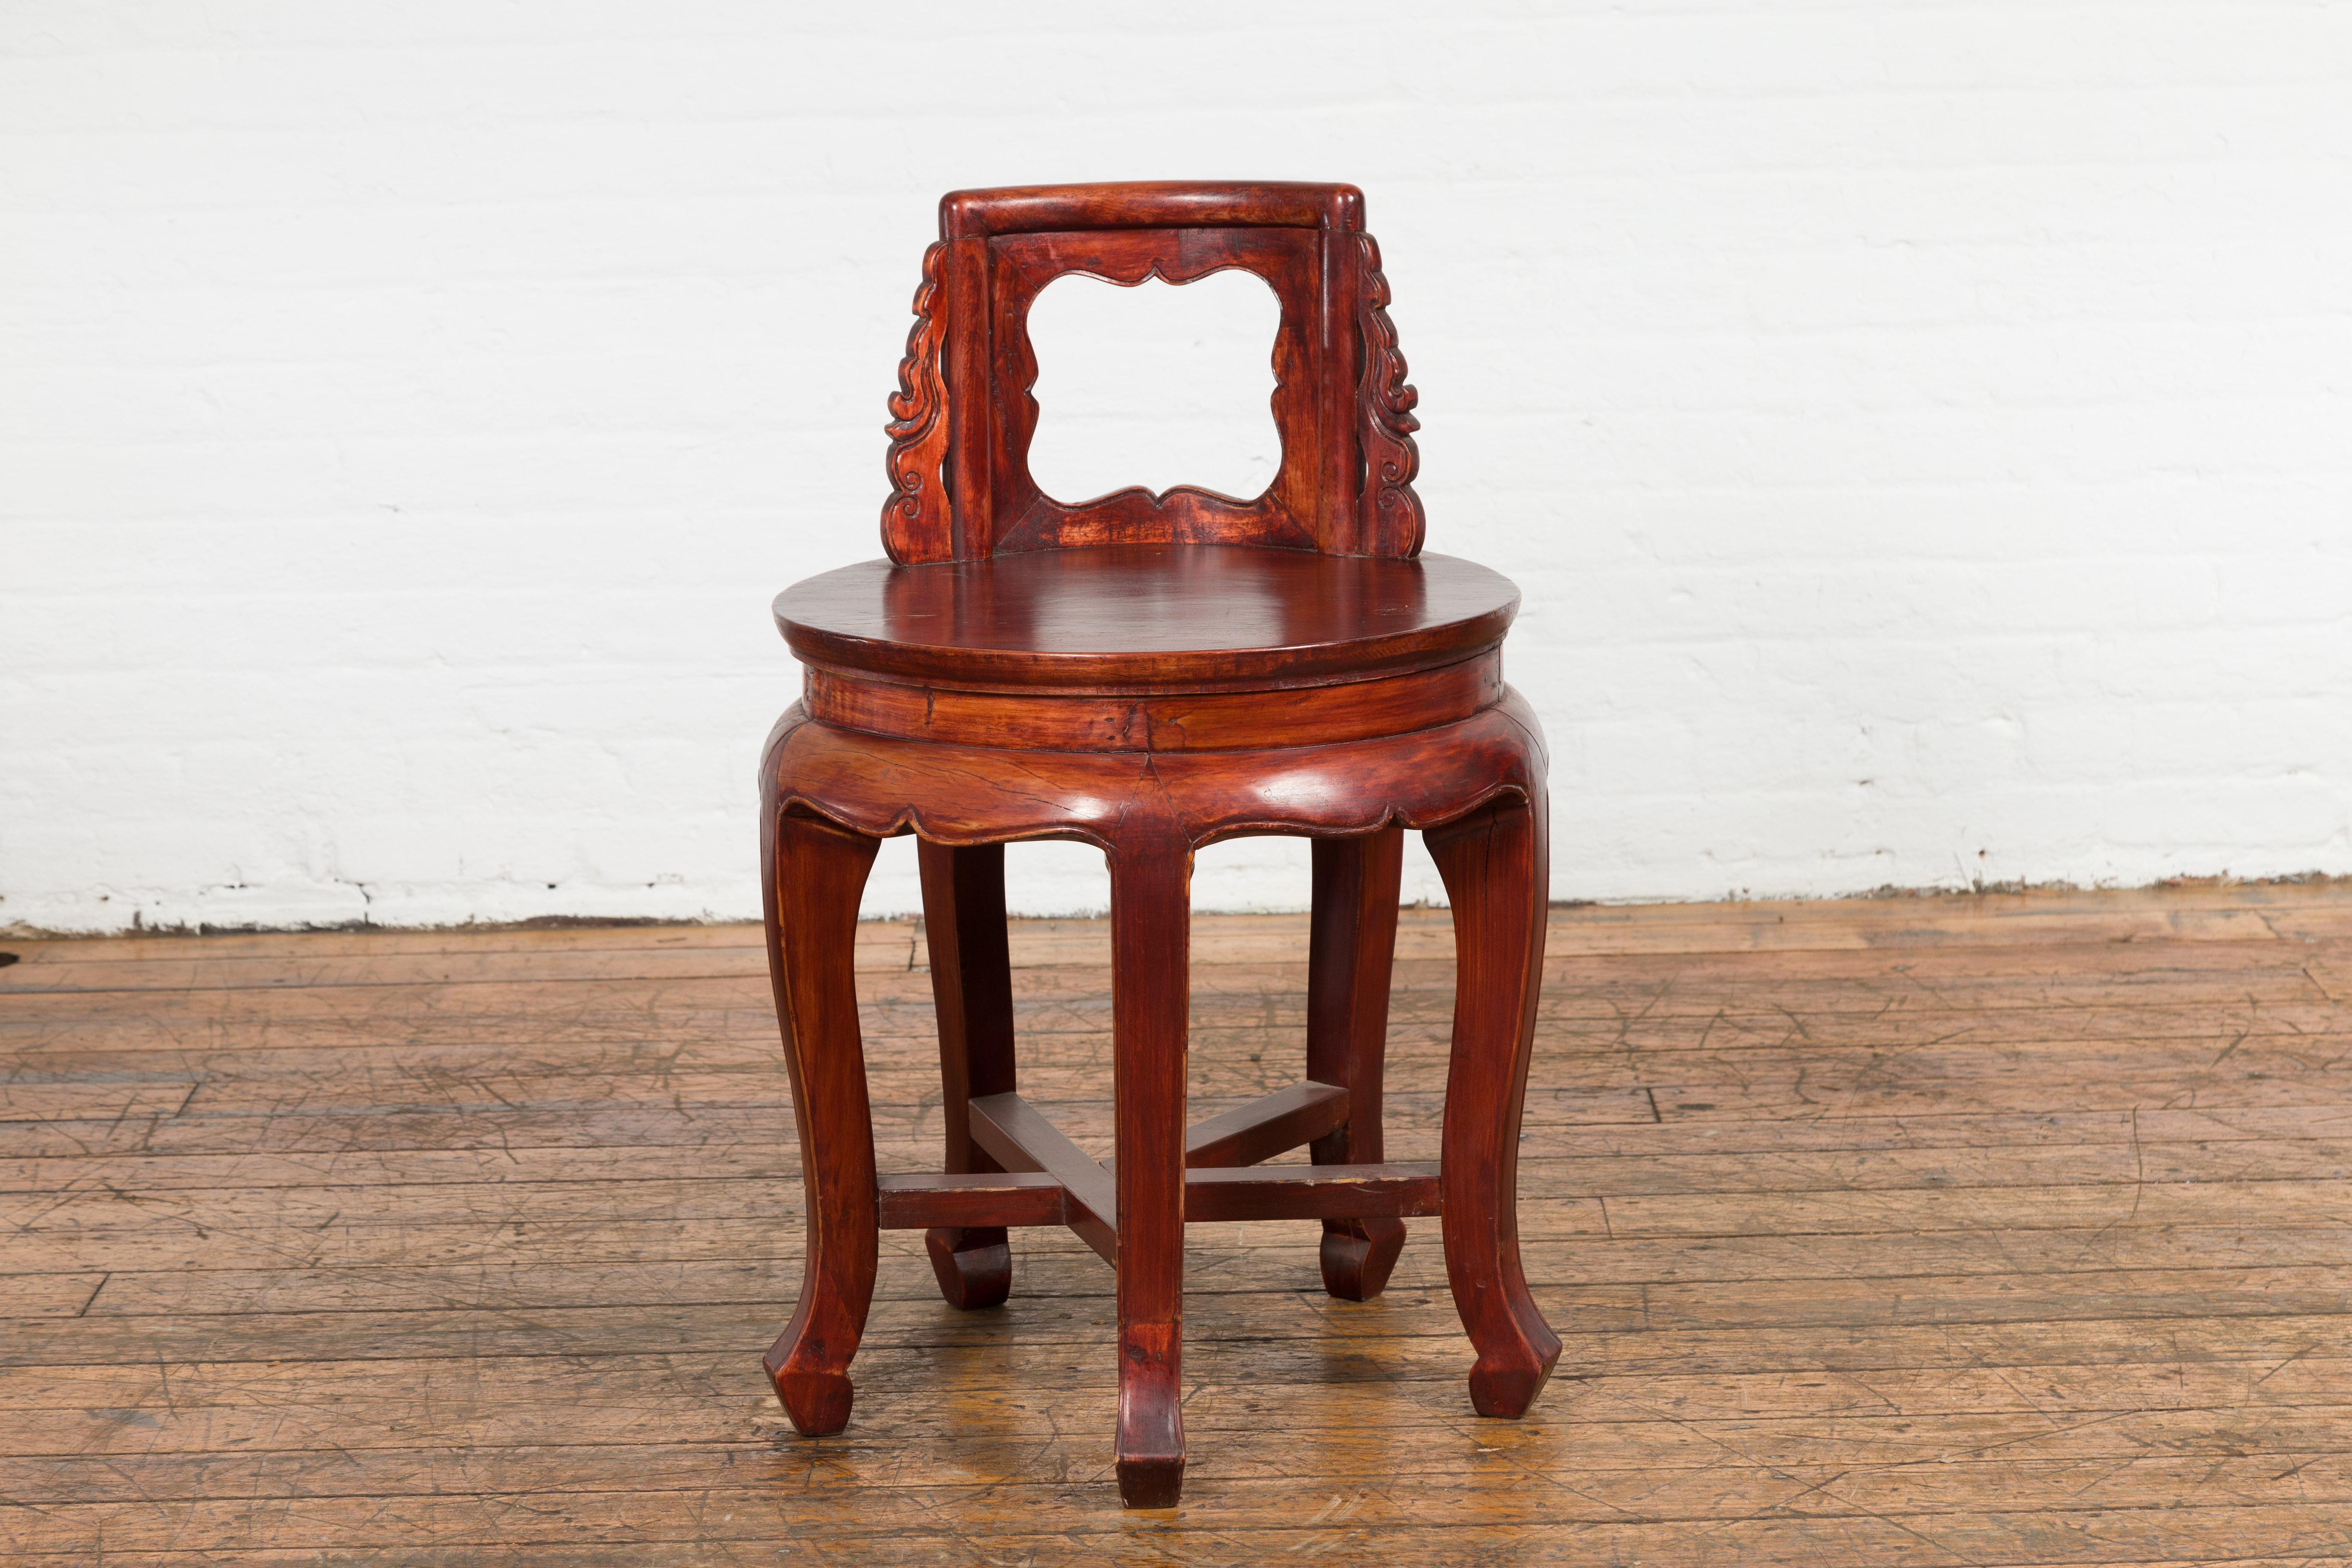 A late Qing Dynasty period unusual diminutive wooden chair from the early 20th century with carved back, curving legs and cross stretcher. This late Qing Dynasty period diminutive wooden chair is a piece of early 20th-century craftsmanship that